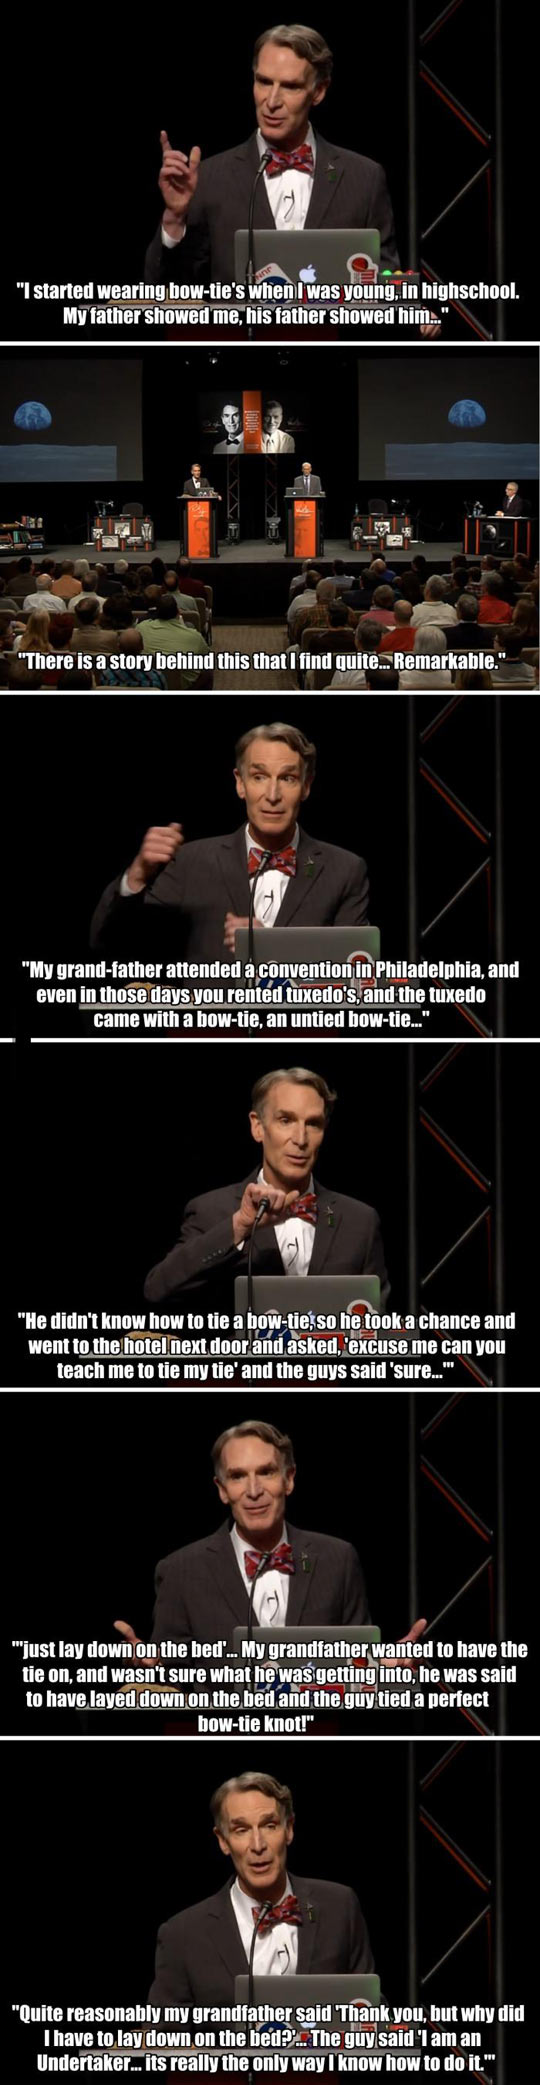 The Funny Story Behind Bill Nye's Bow Tie